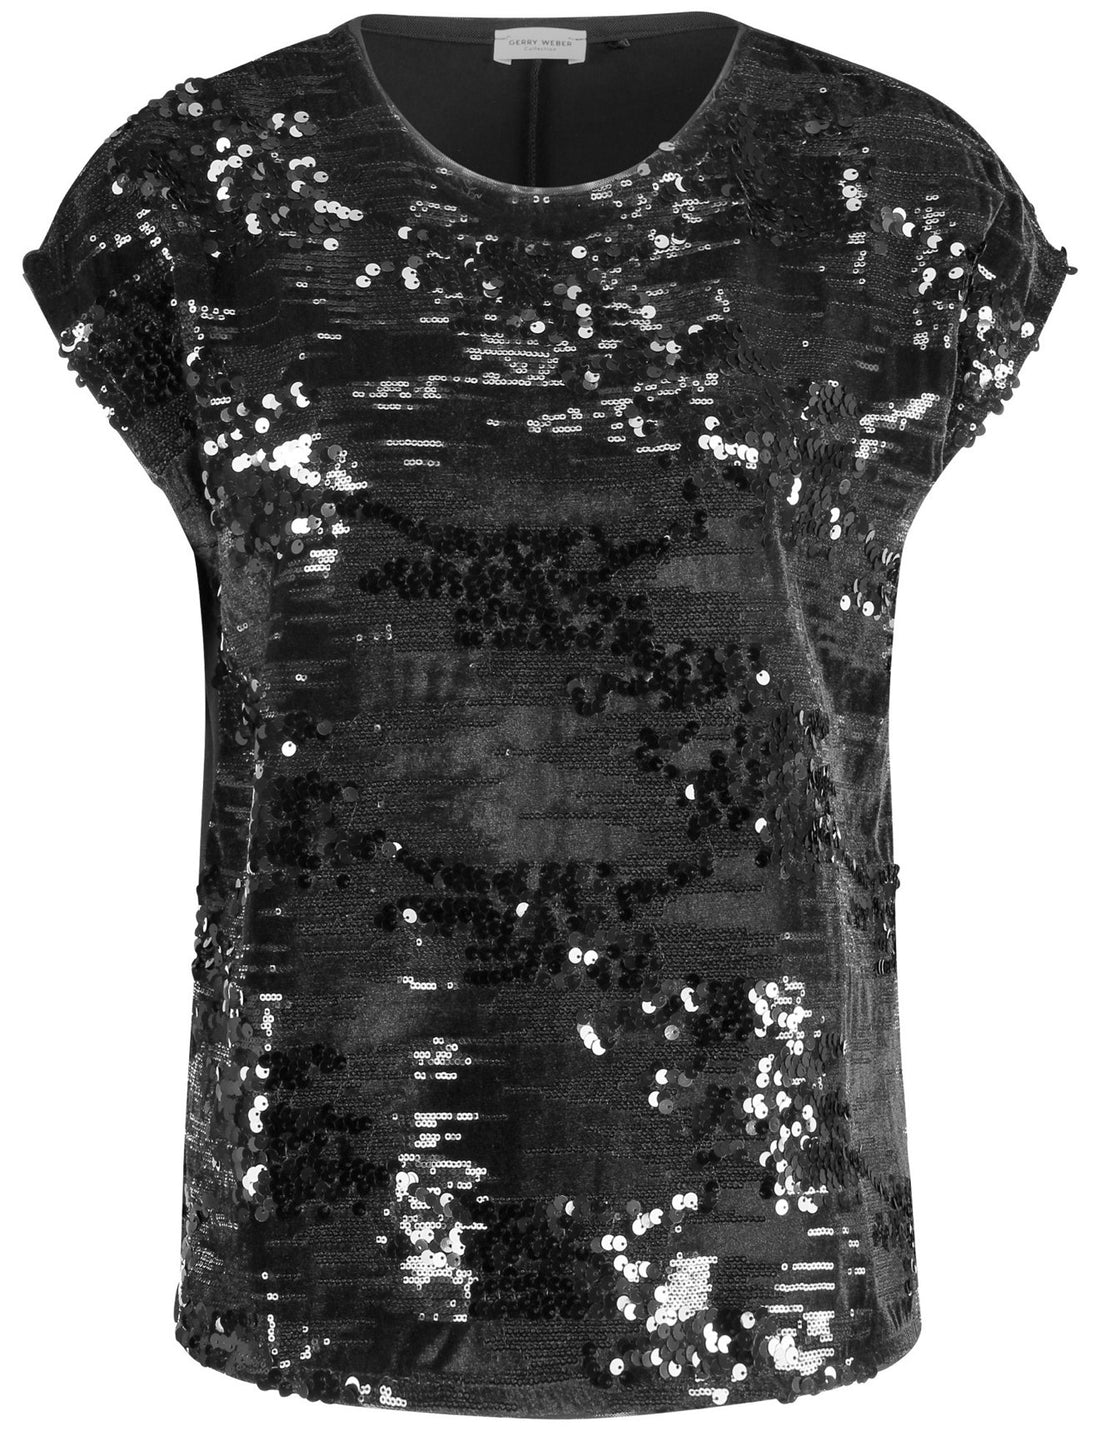 Elegant Top With Fabric Panelling And Sequin Embellishment_270249-35046_11000_02